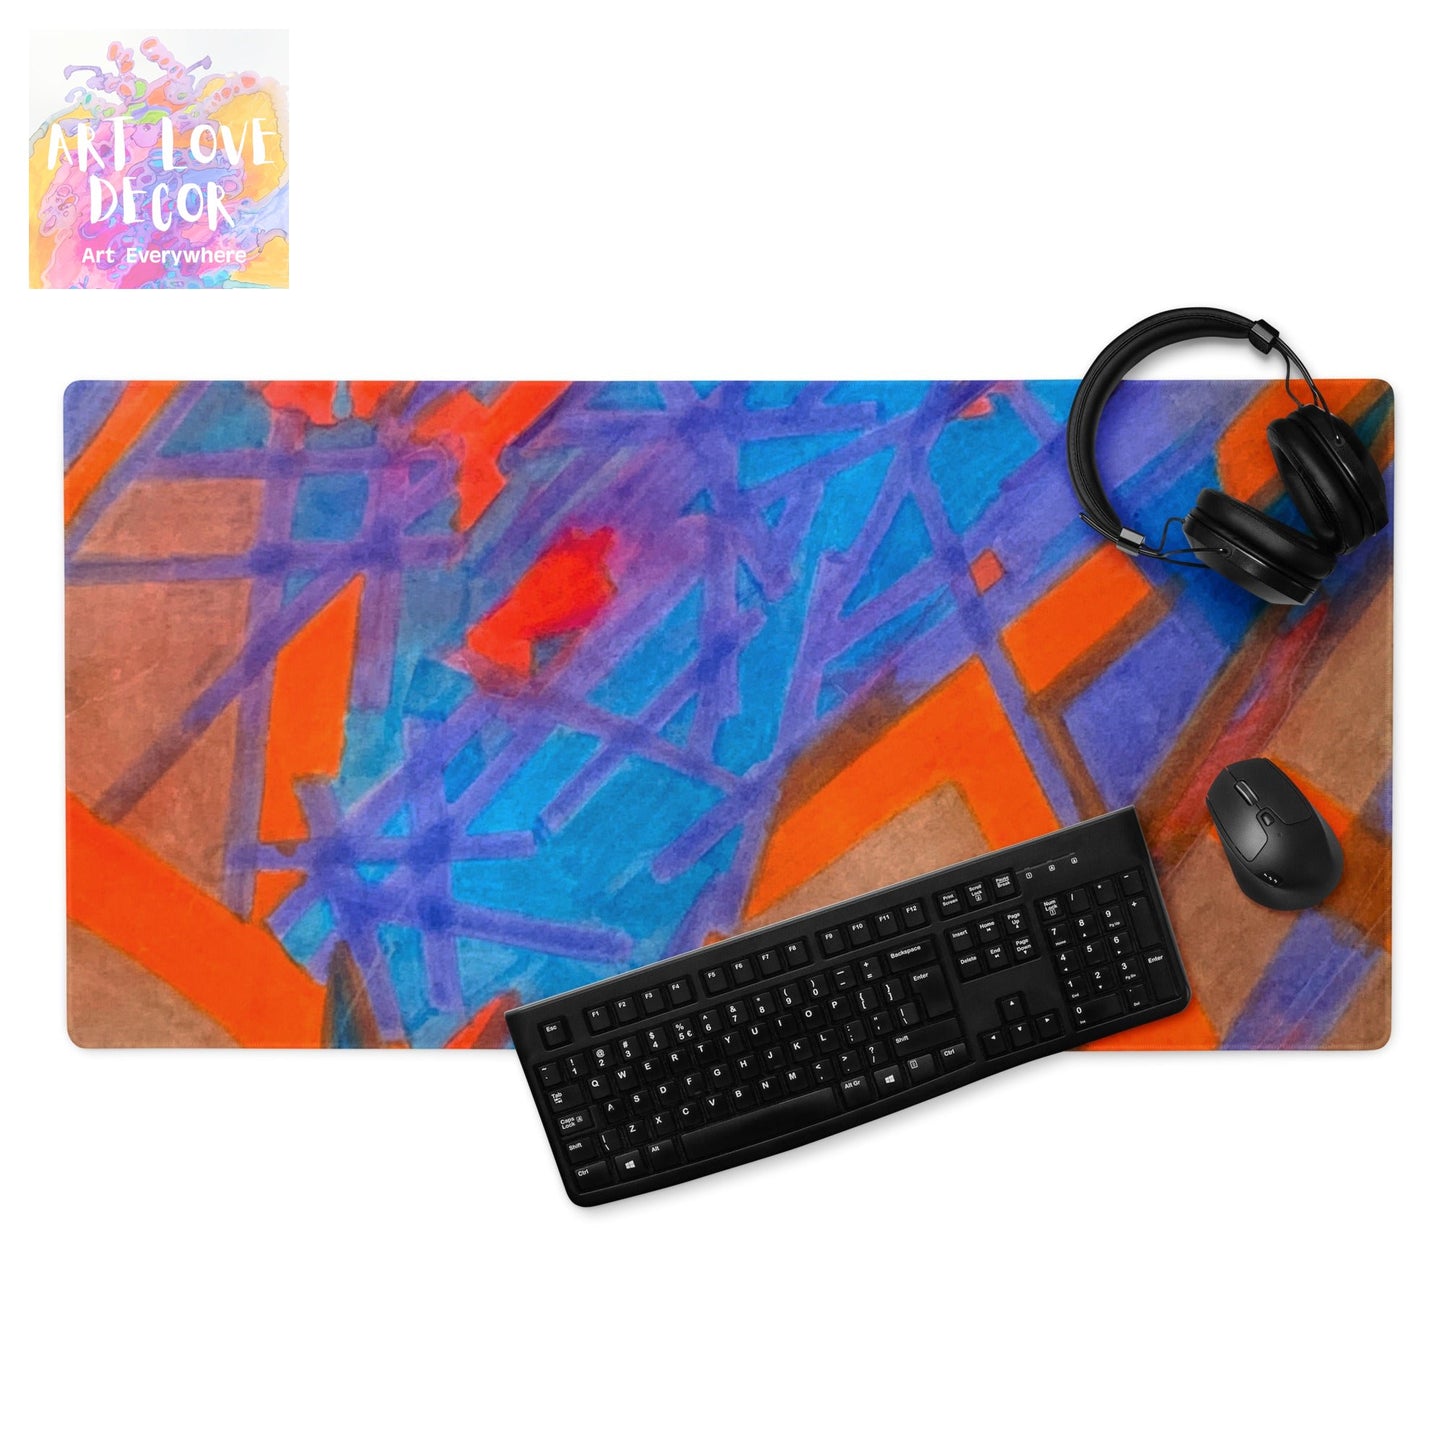 Hot Date Abstract Gaming mouse pad - Art Love Decor